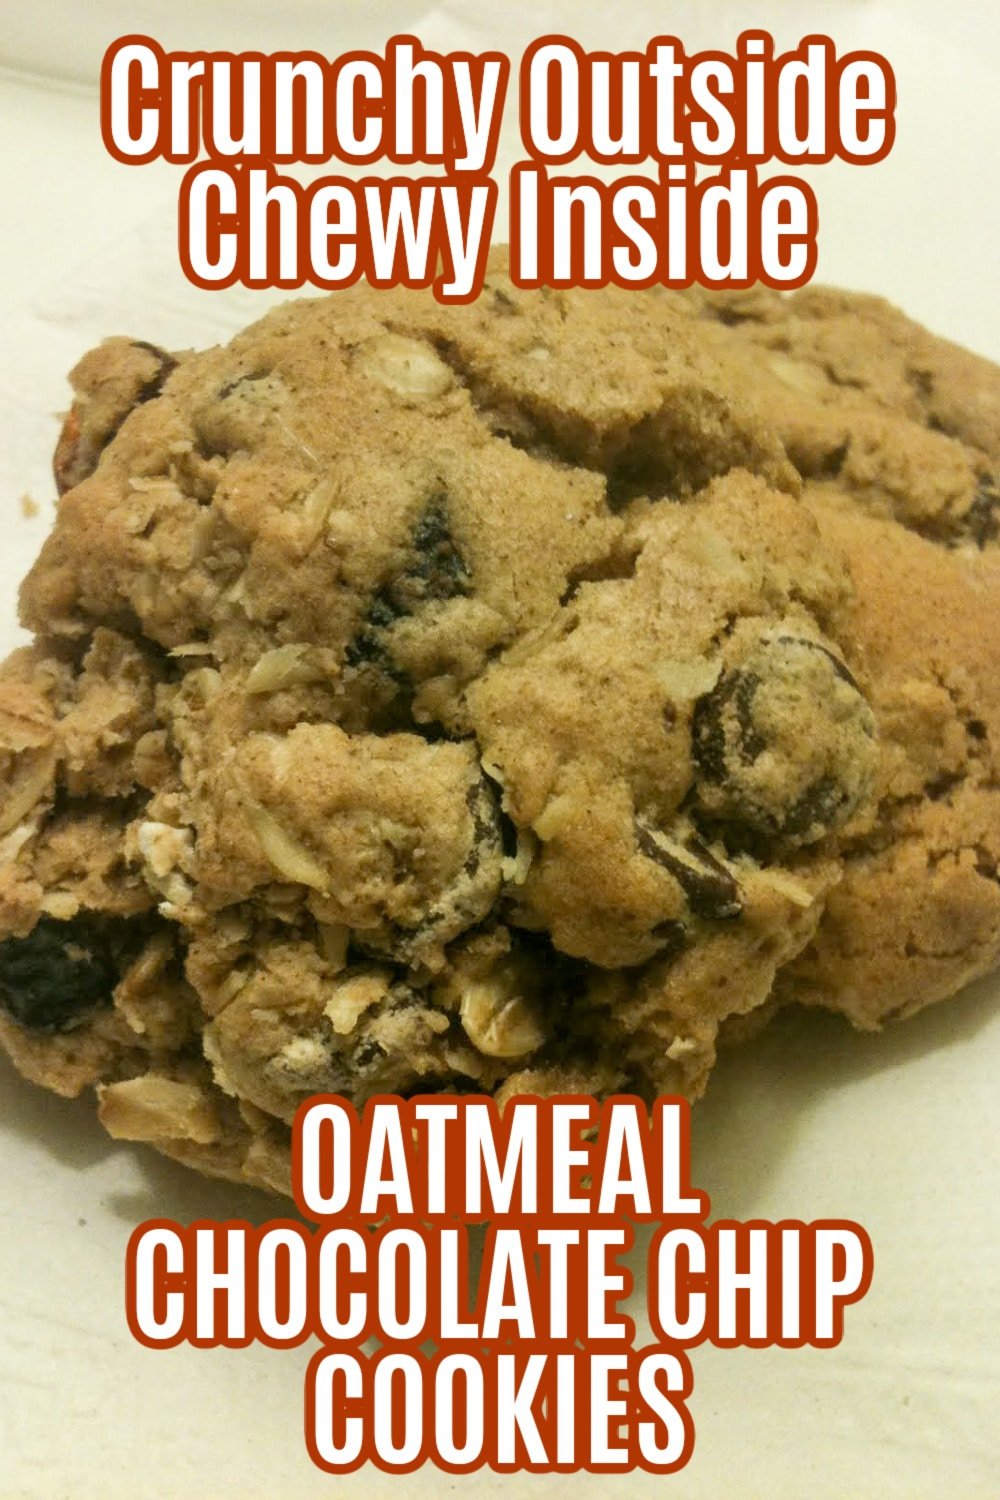 Crunchy Outside and Chewy Inside Cookie Recipe